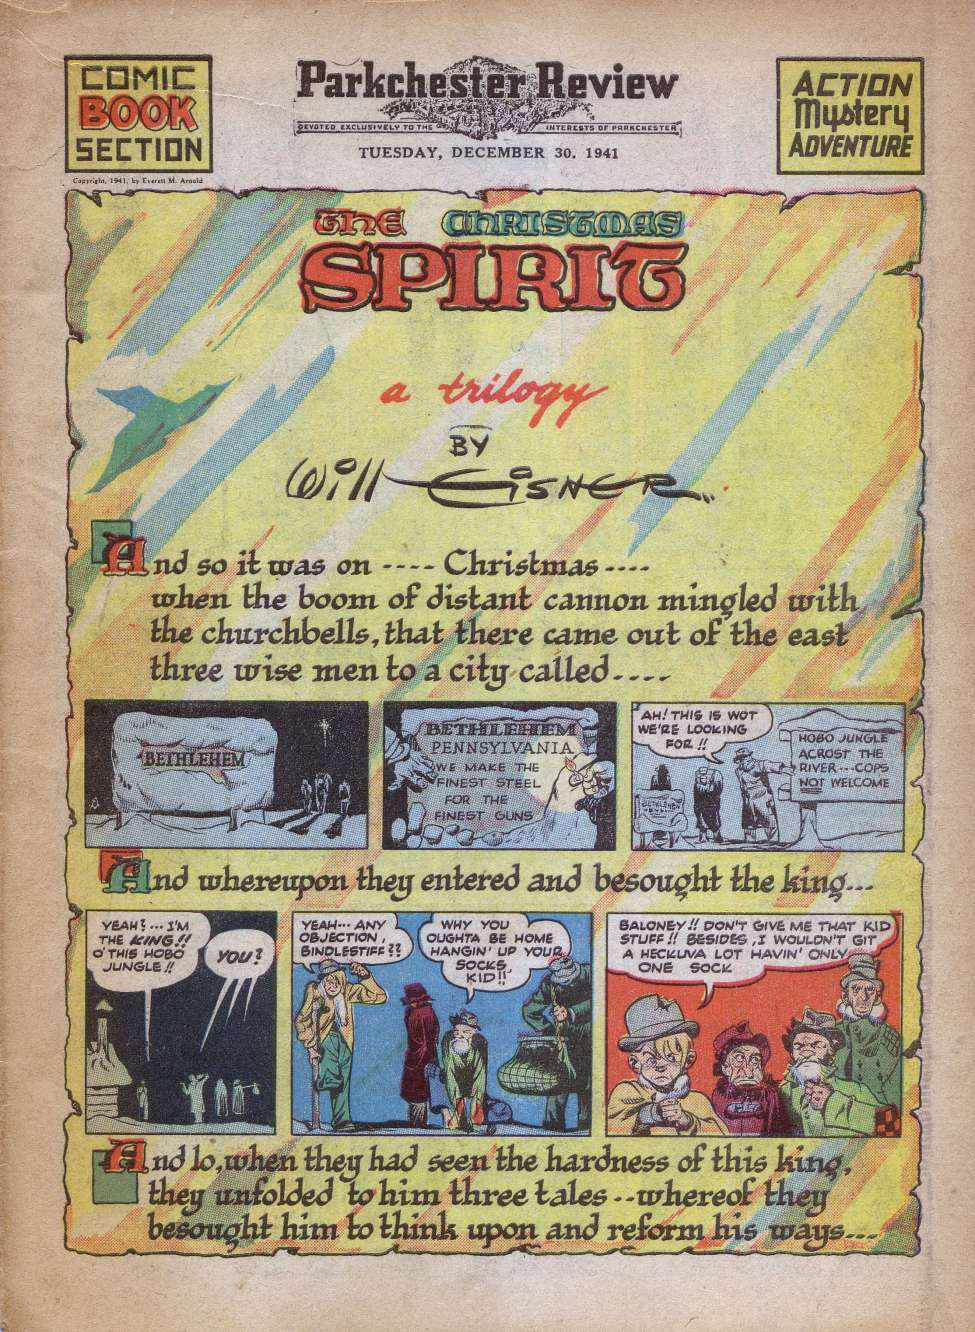 Comic Book Cover For The Spirit (1941-12-28) - Parkchester Review